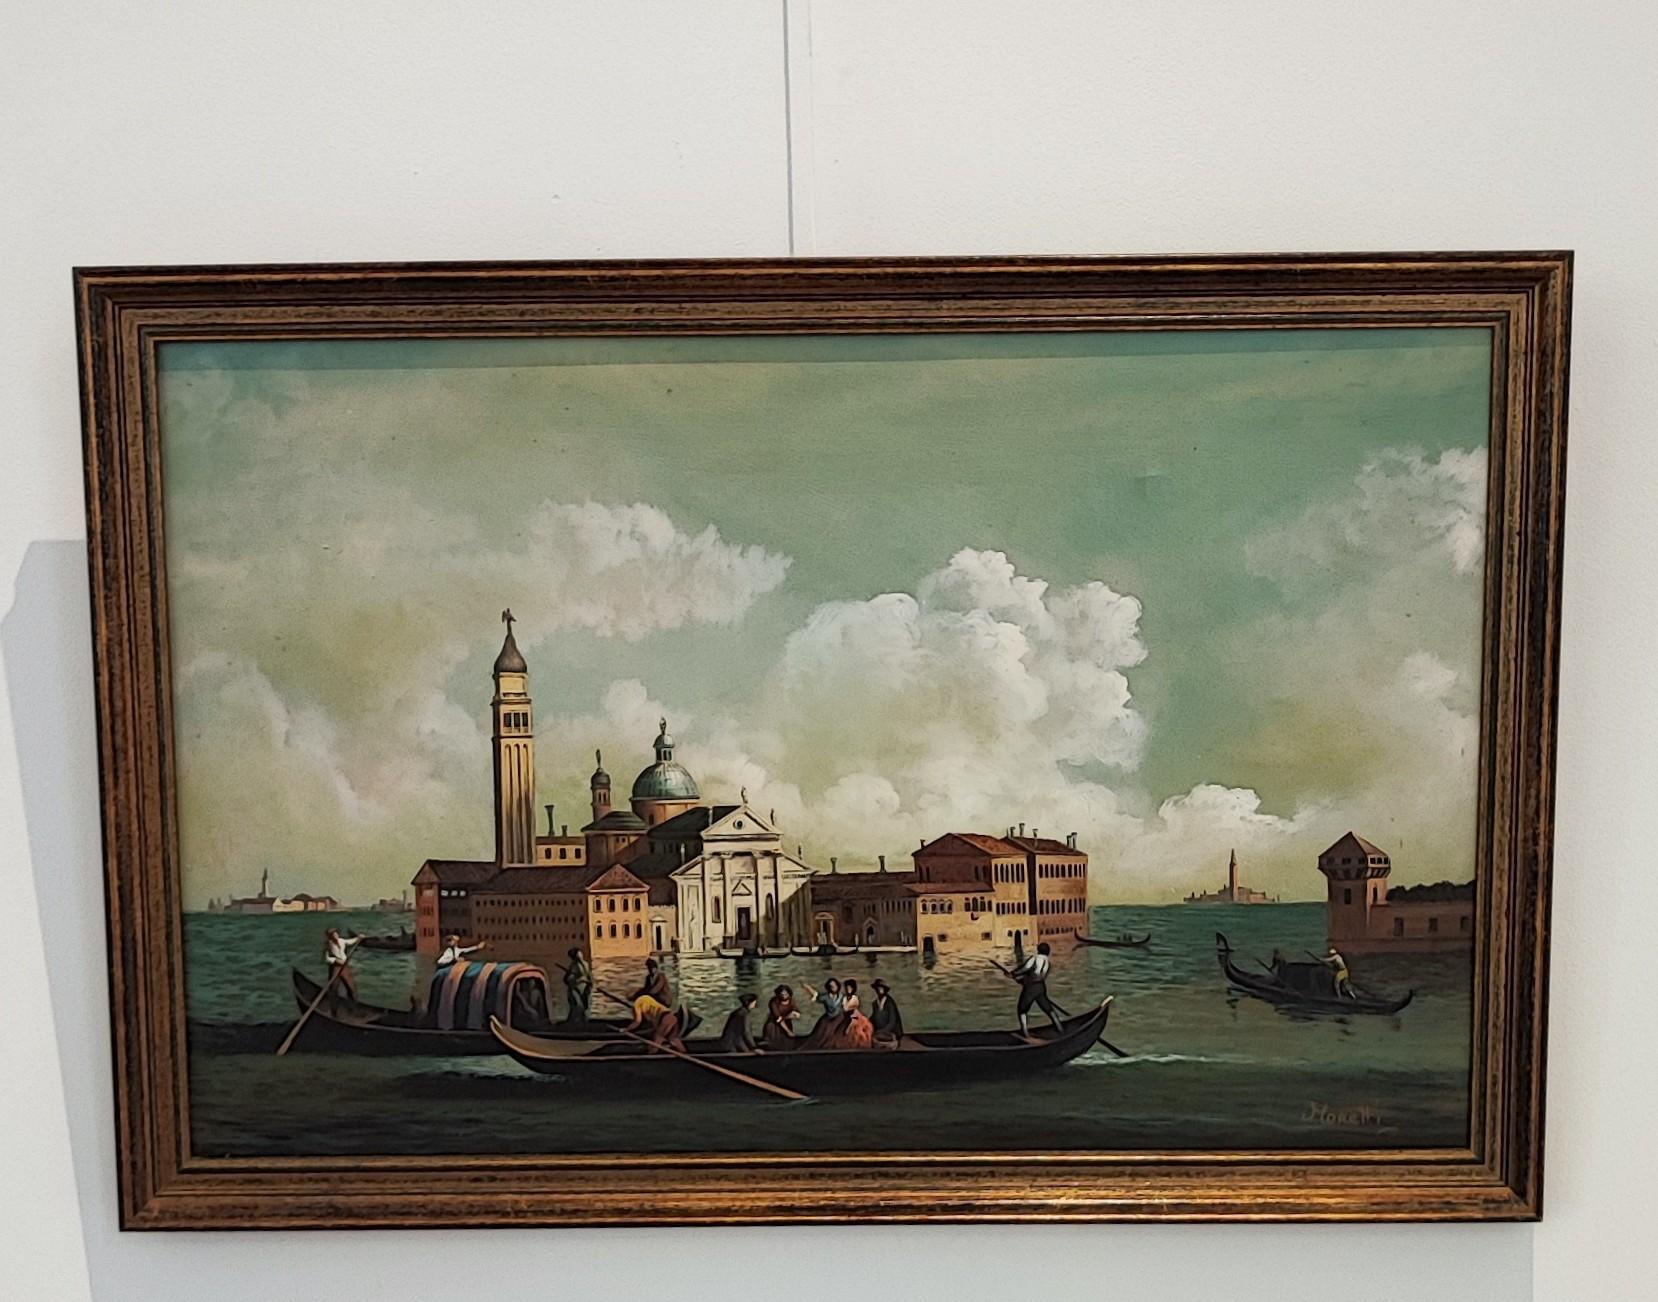 Lively Venice Lagoon - Painting by Moretti